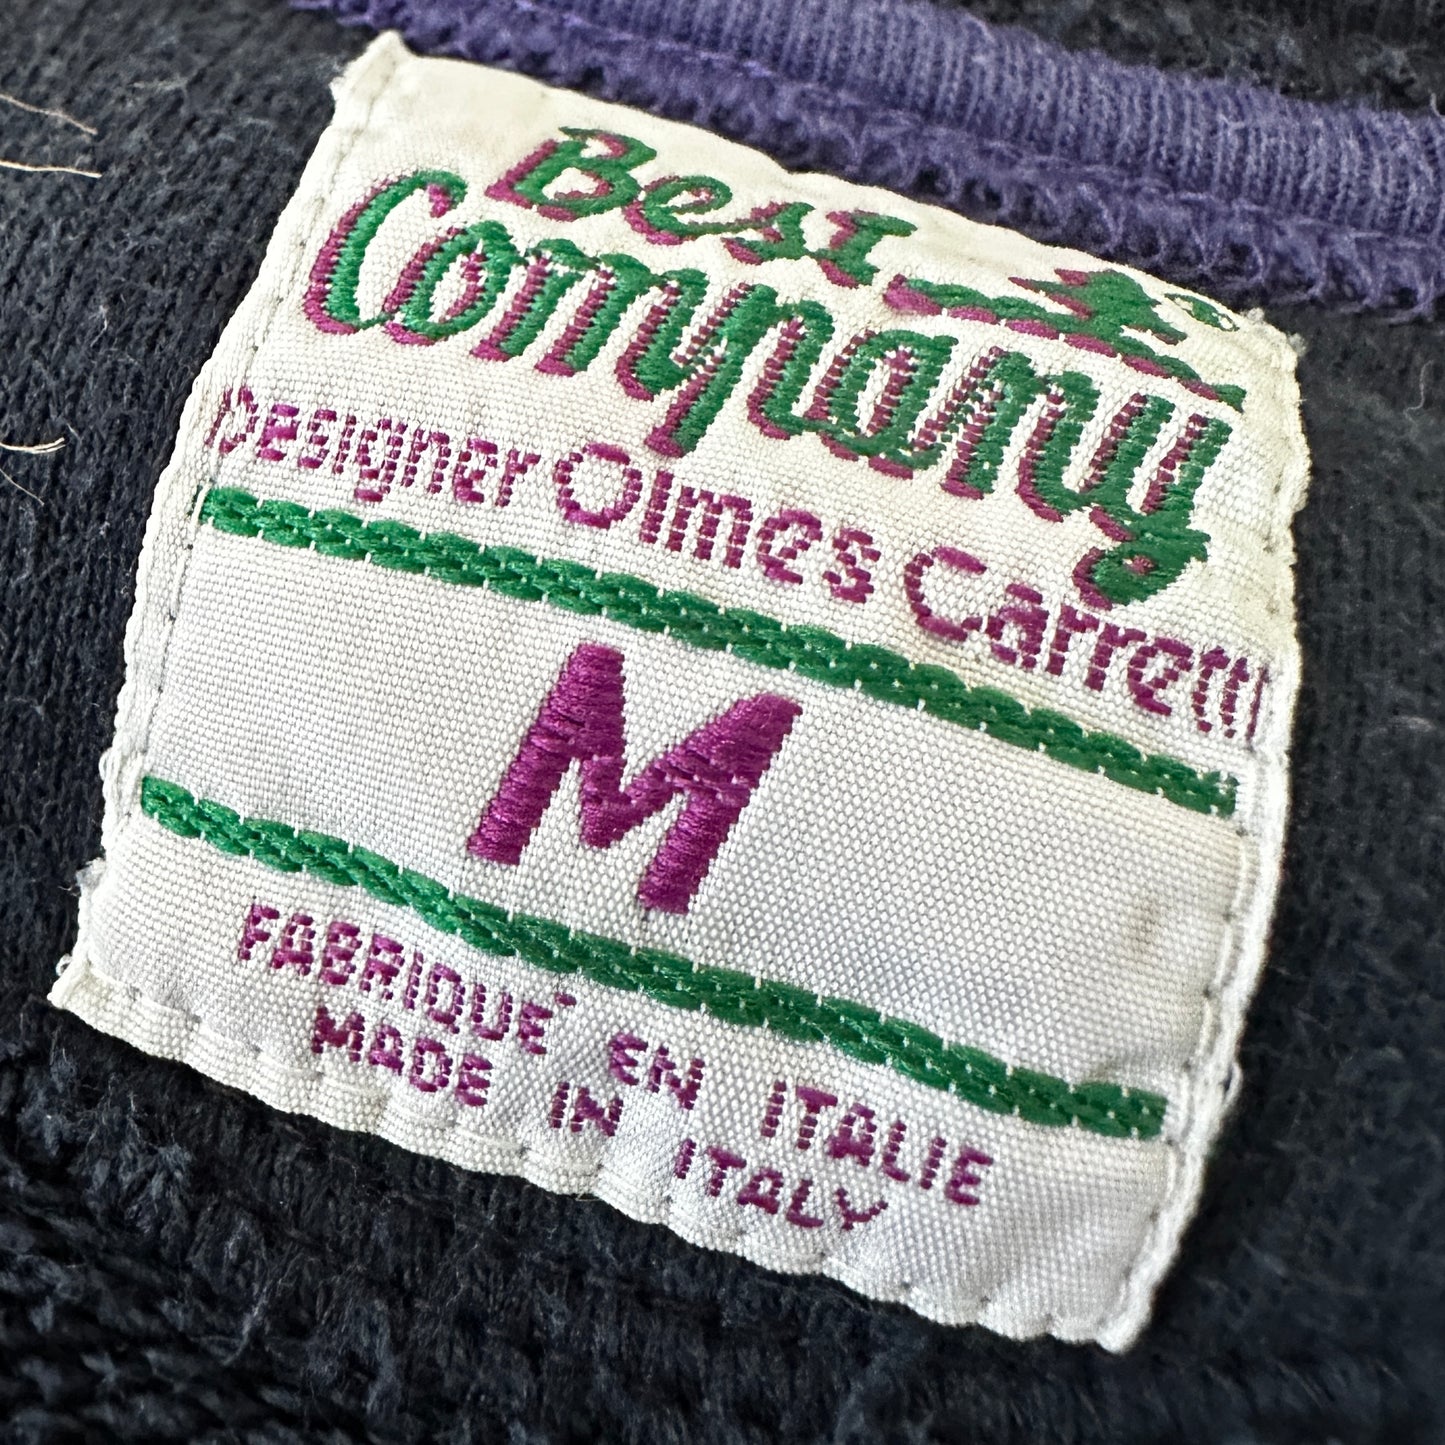 Best Company 1986 College Cotton Cardigan - M - Made in Italy